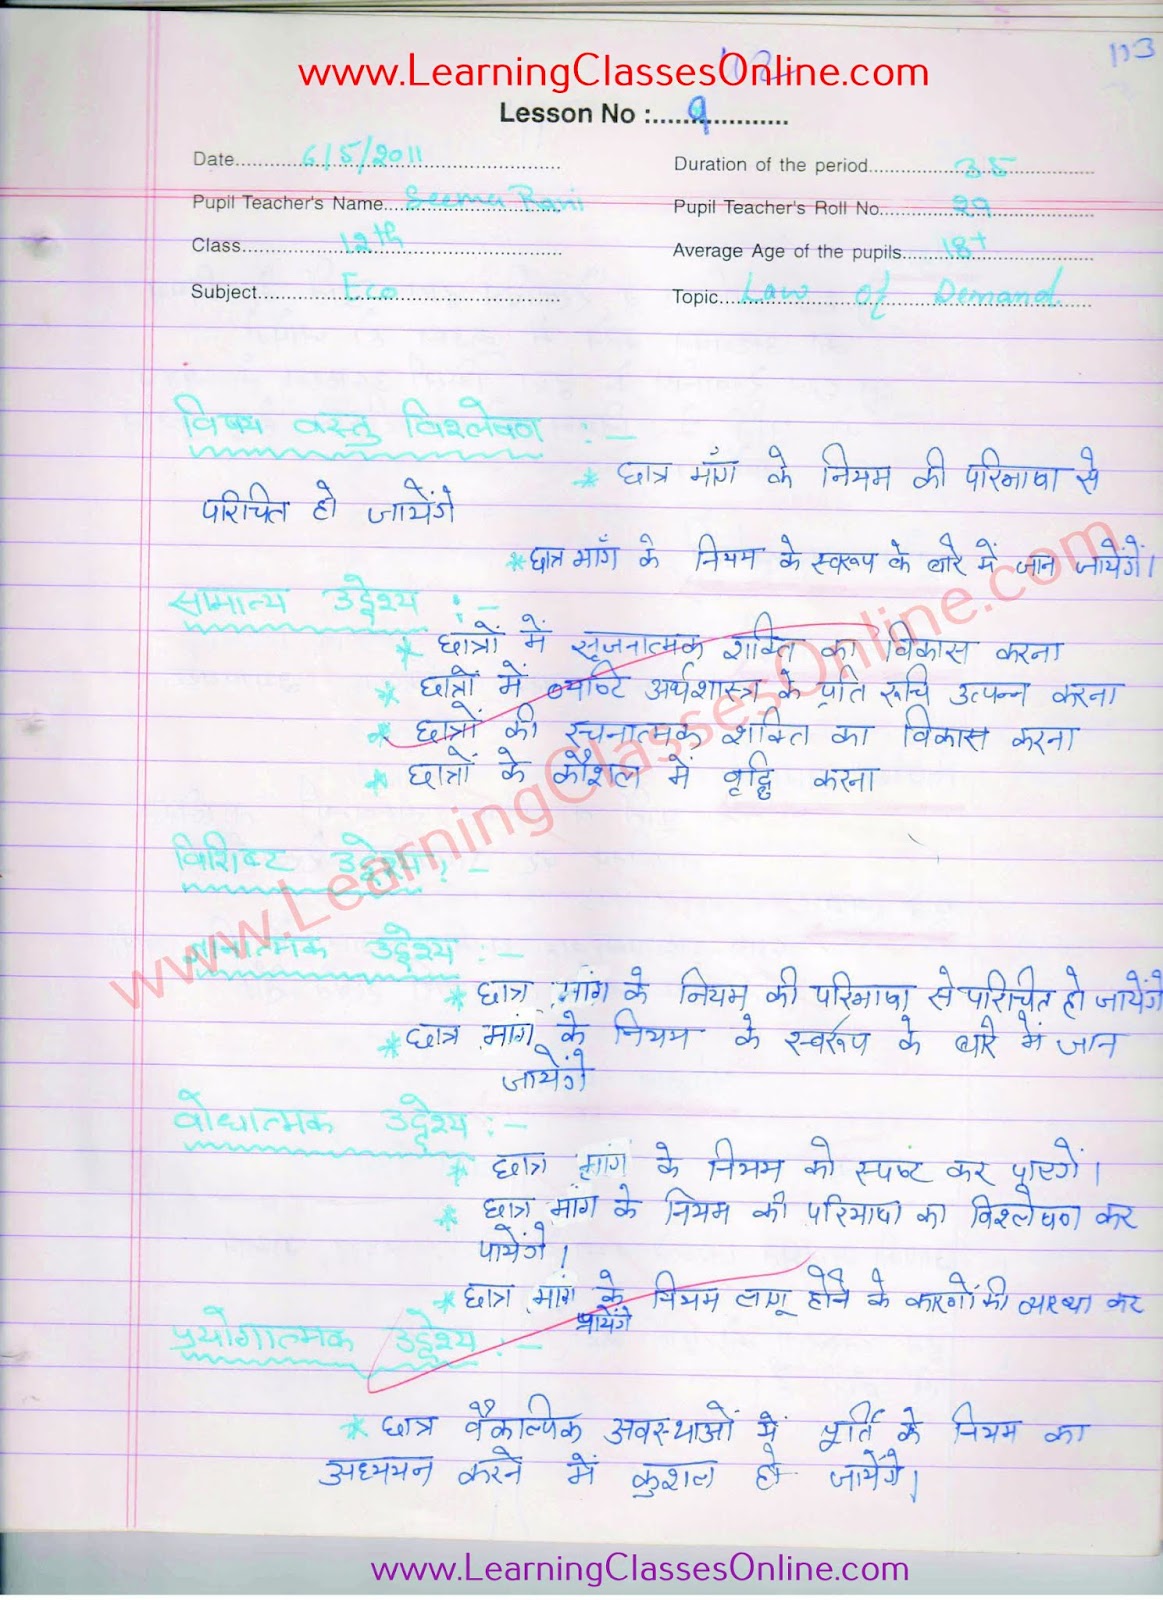 Real School Teaching Economics Lesson Plan in Hindi for class 10th on Law of Demand (  मांग के नियम ) pdf download free